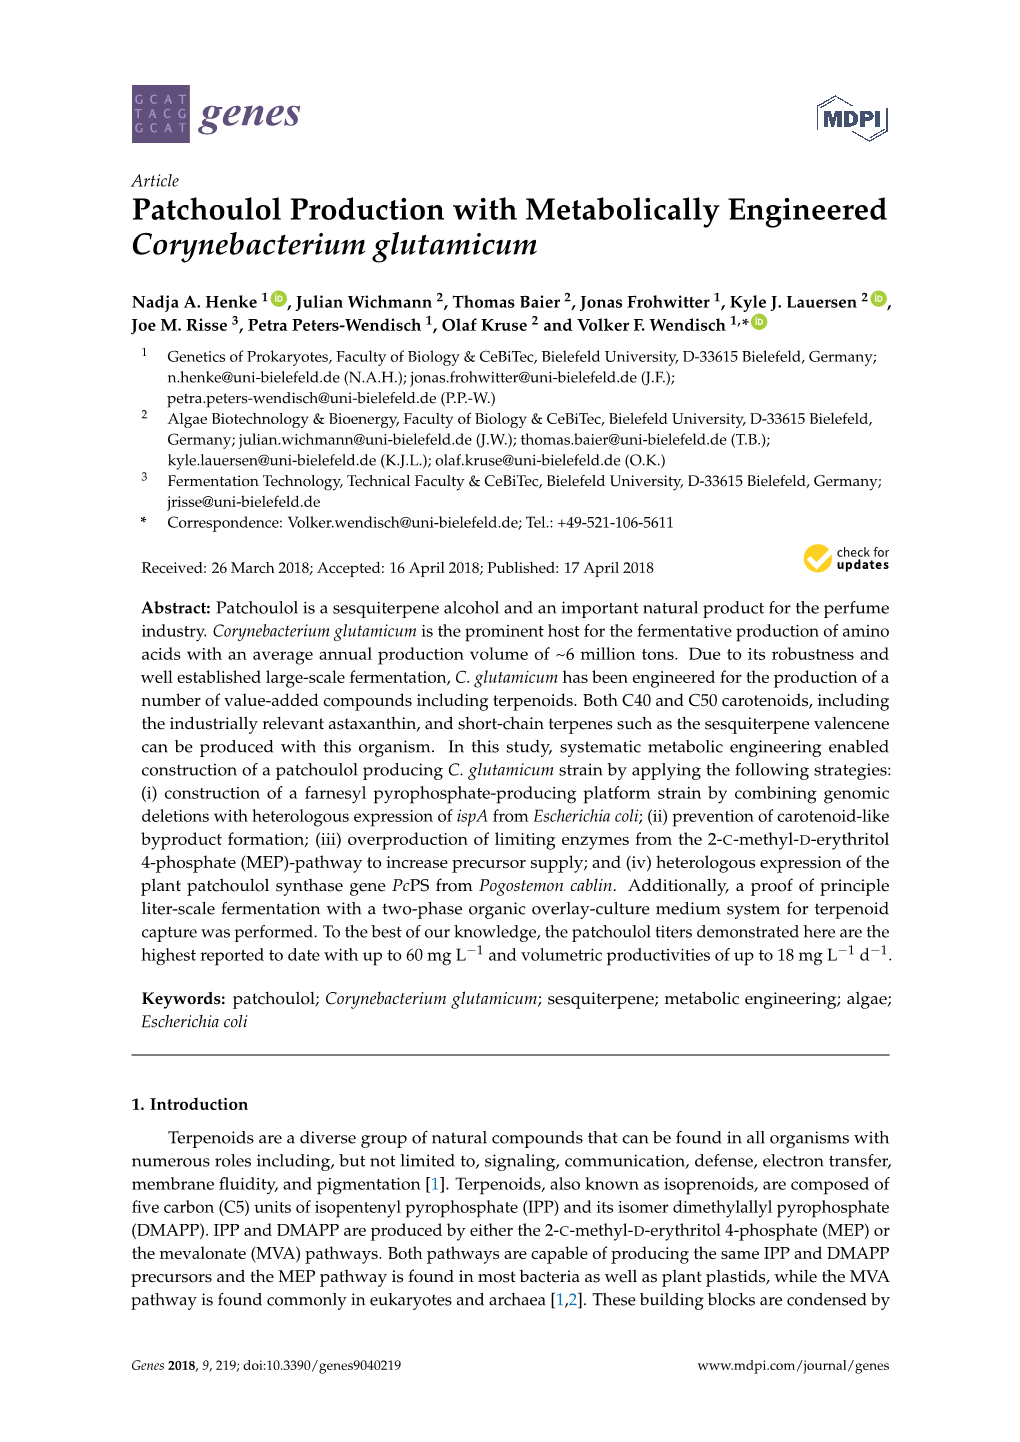 Patchoulol Production with Metabolically Engineered Corynebacterium Glutamicum